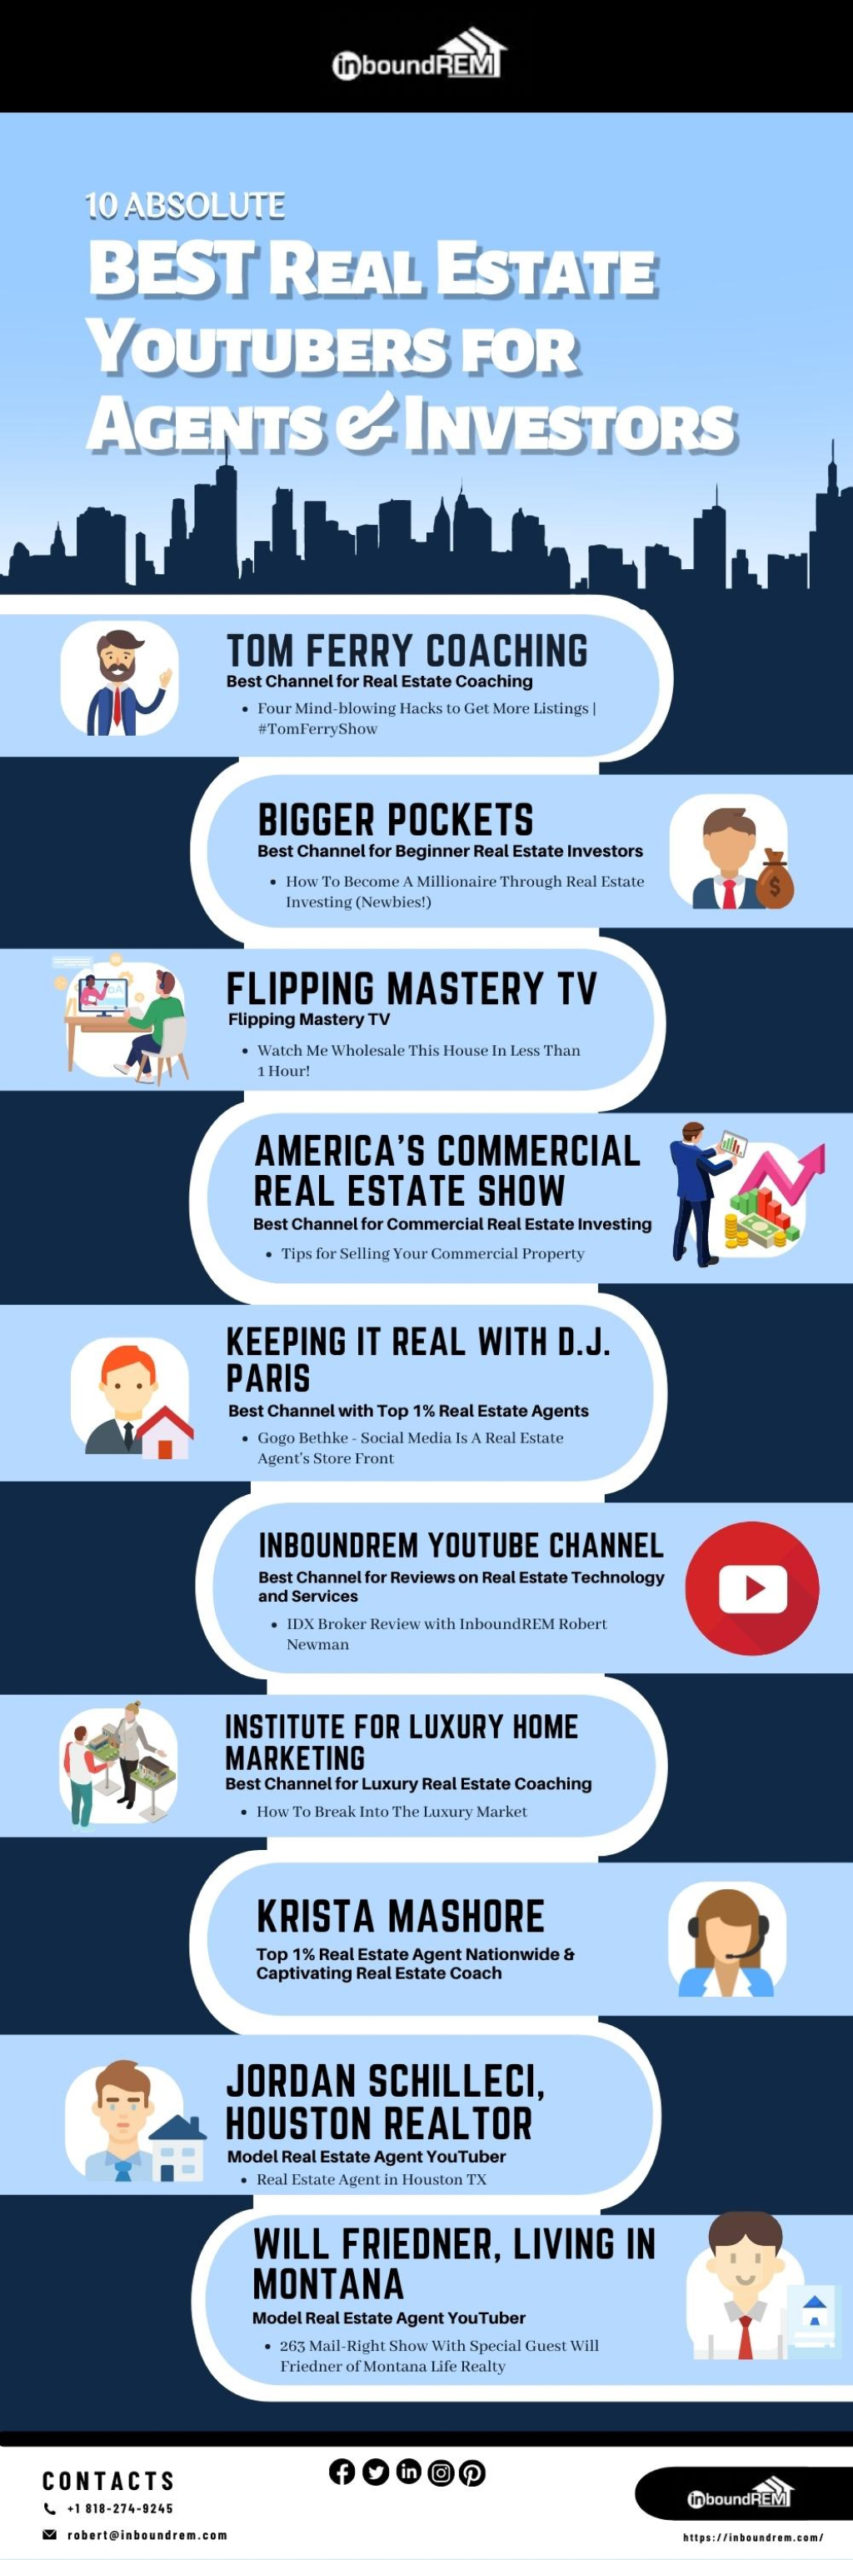 10 ABSOLUTE BEST Real Estate Youtubers for Agents & Investors